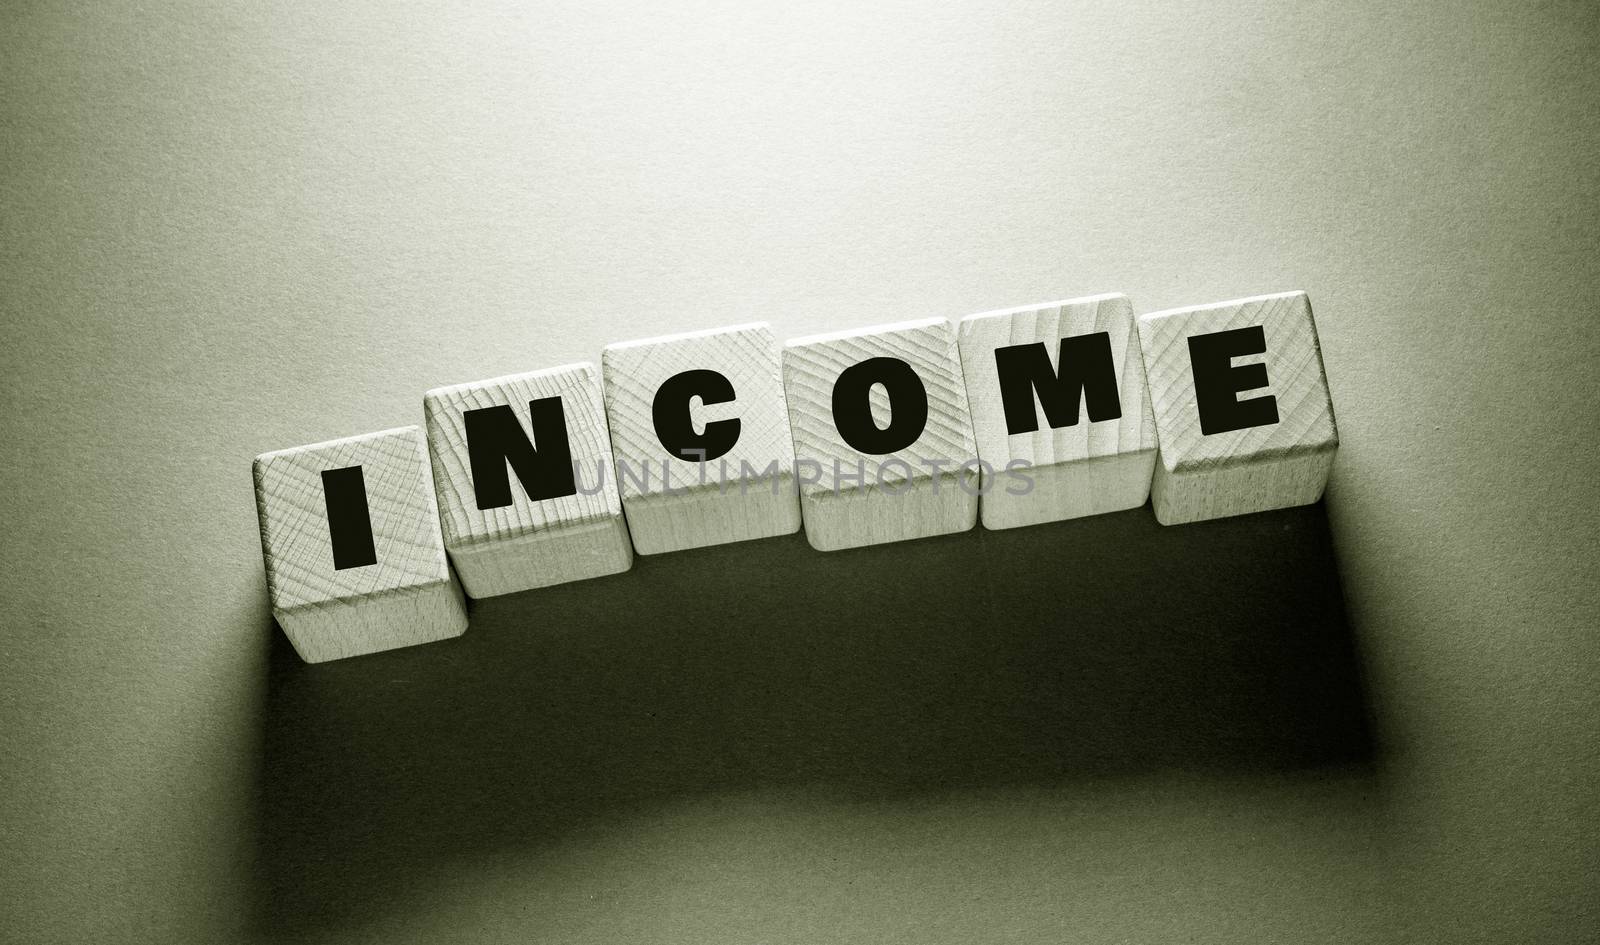 Income Word Written on Wooden Cubes